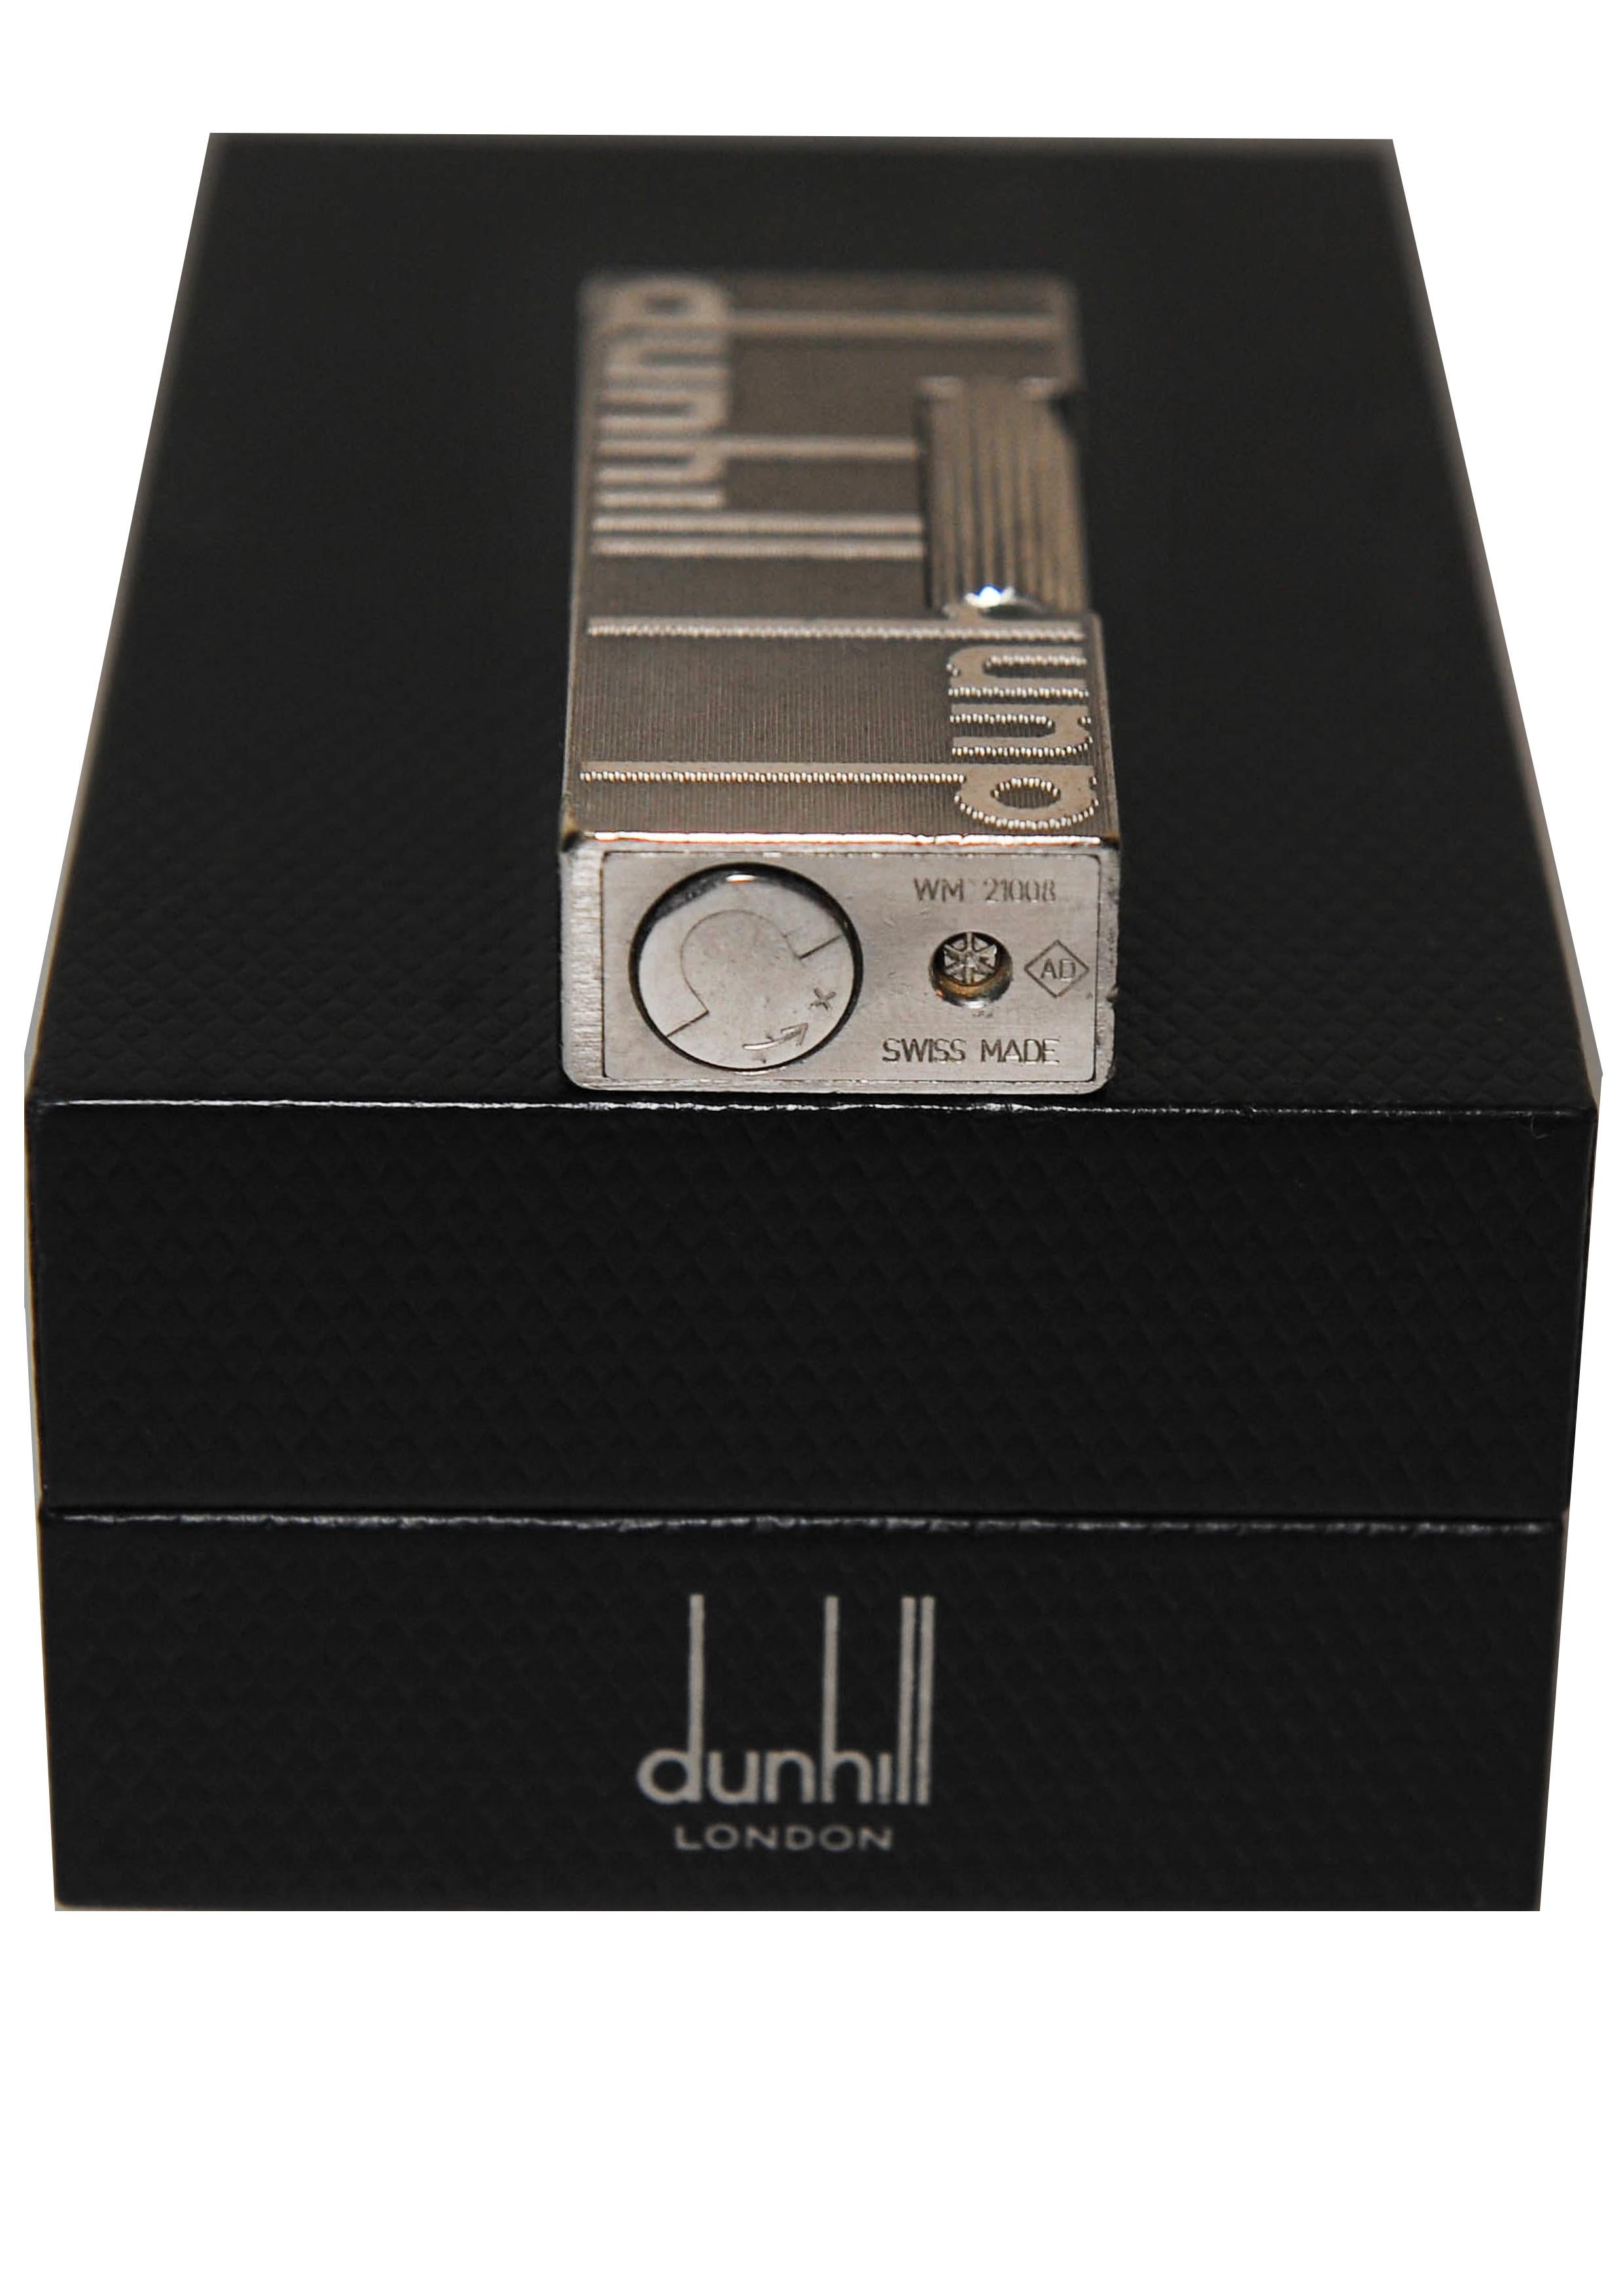 Contemporary Dunhill of London Longtail Logo Rollgas Cigarette Lighter With Dunhill Box For Sale